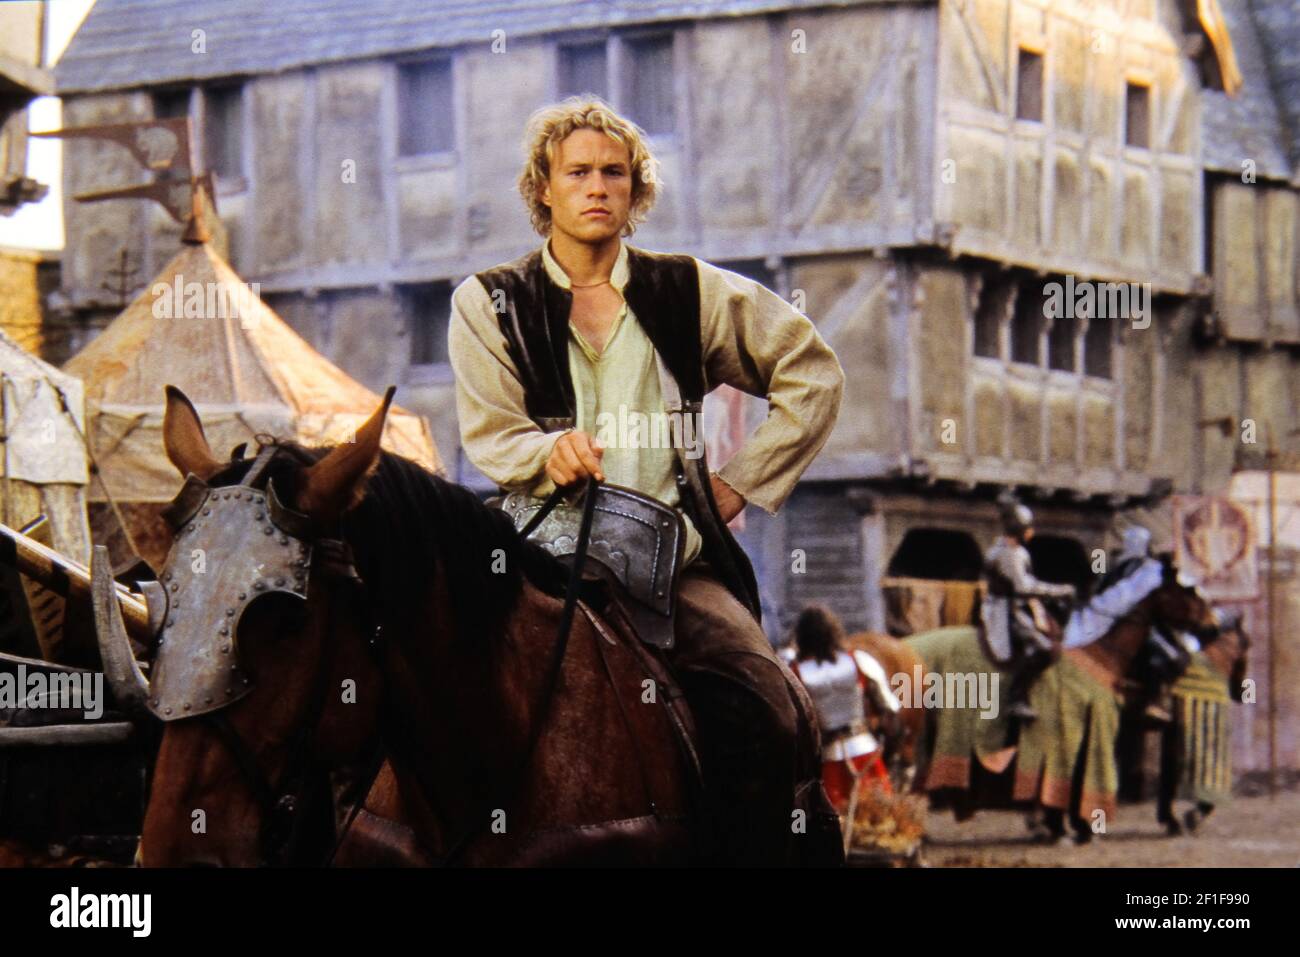 Heath Ledger, 'A Knight's Tale' (2001) Sony Pictures. Photo Credit: Egon Endrenyi/Sony Pictures/The Hollywood Archive - File Reference # 34082-1070THA Stock Photo